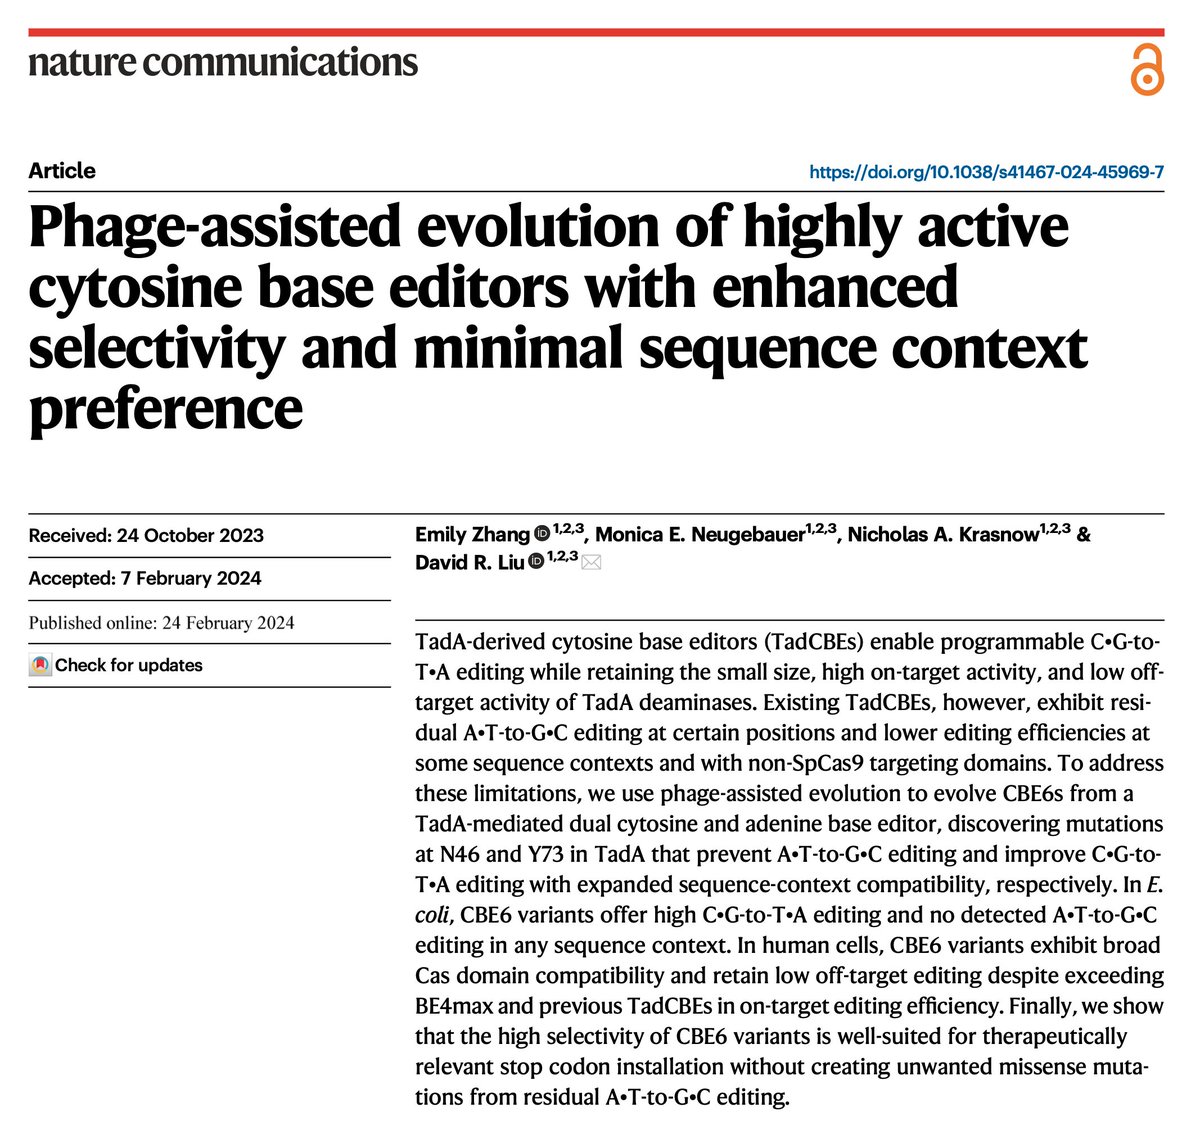 Today we report in @NatureComms the development of laboratory-evolved CBE6 cytosine base editors that offer high on-target C•G-to-T•A editing, virtually no A•T-to-G•C editing, low off-target editing, broad sequence context compatibility, and compatibility with multiple Cas…